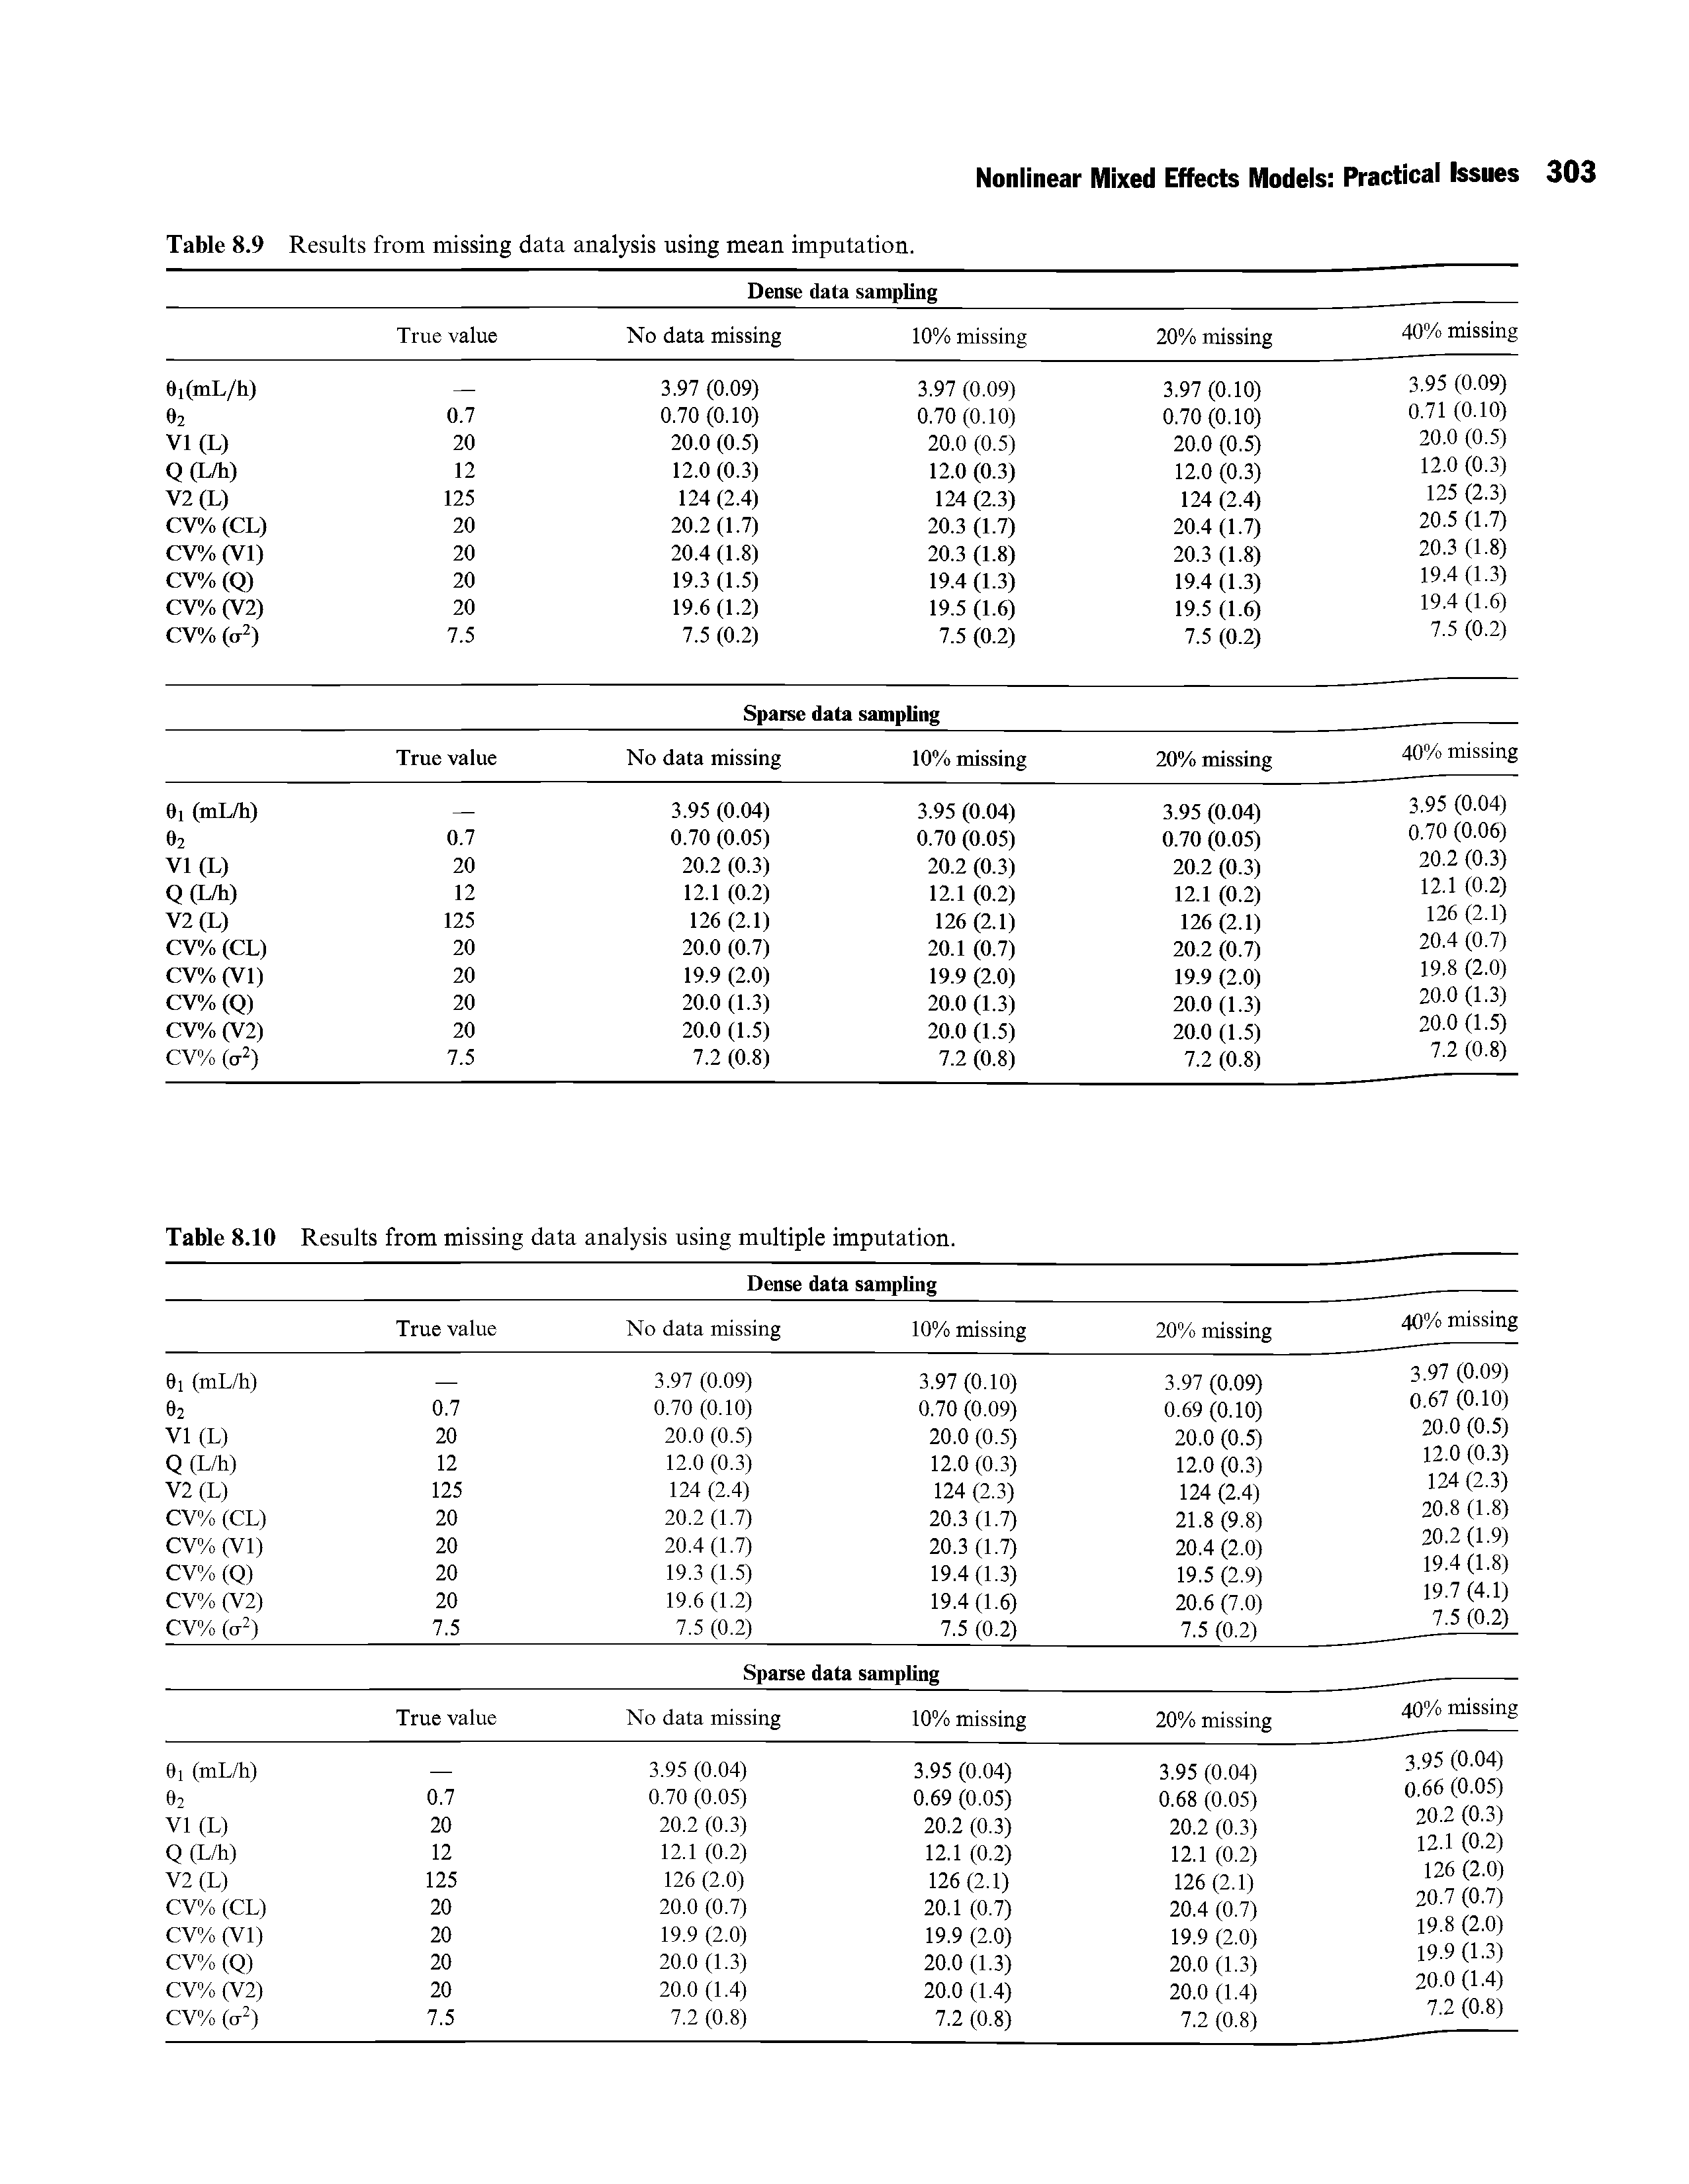 Table 8.10 Results from missing data analysis using multiple imputation.